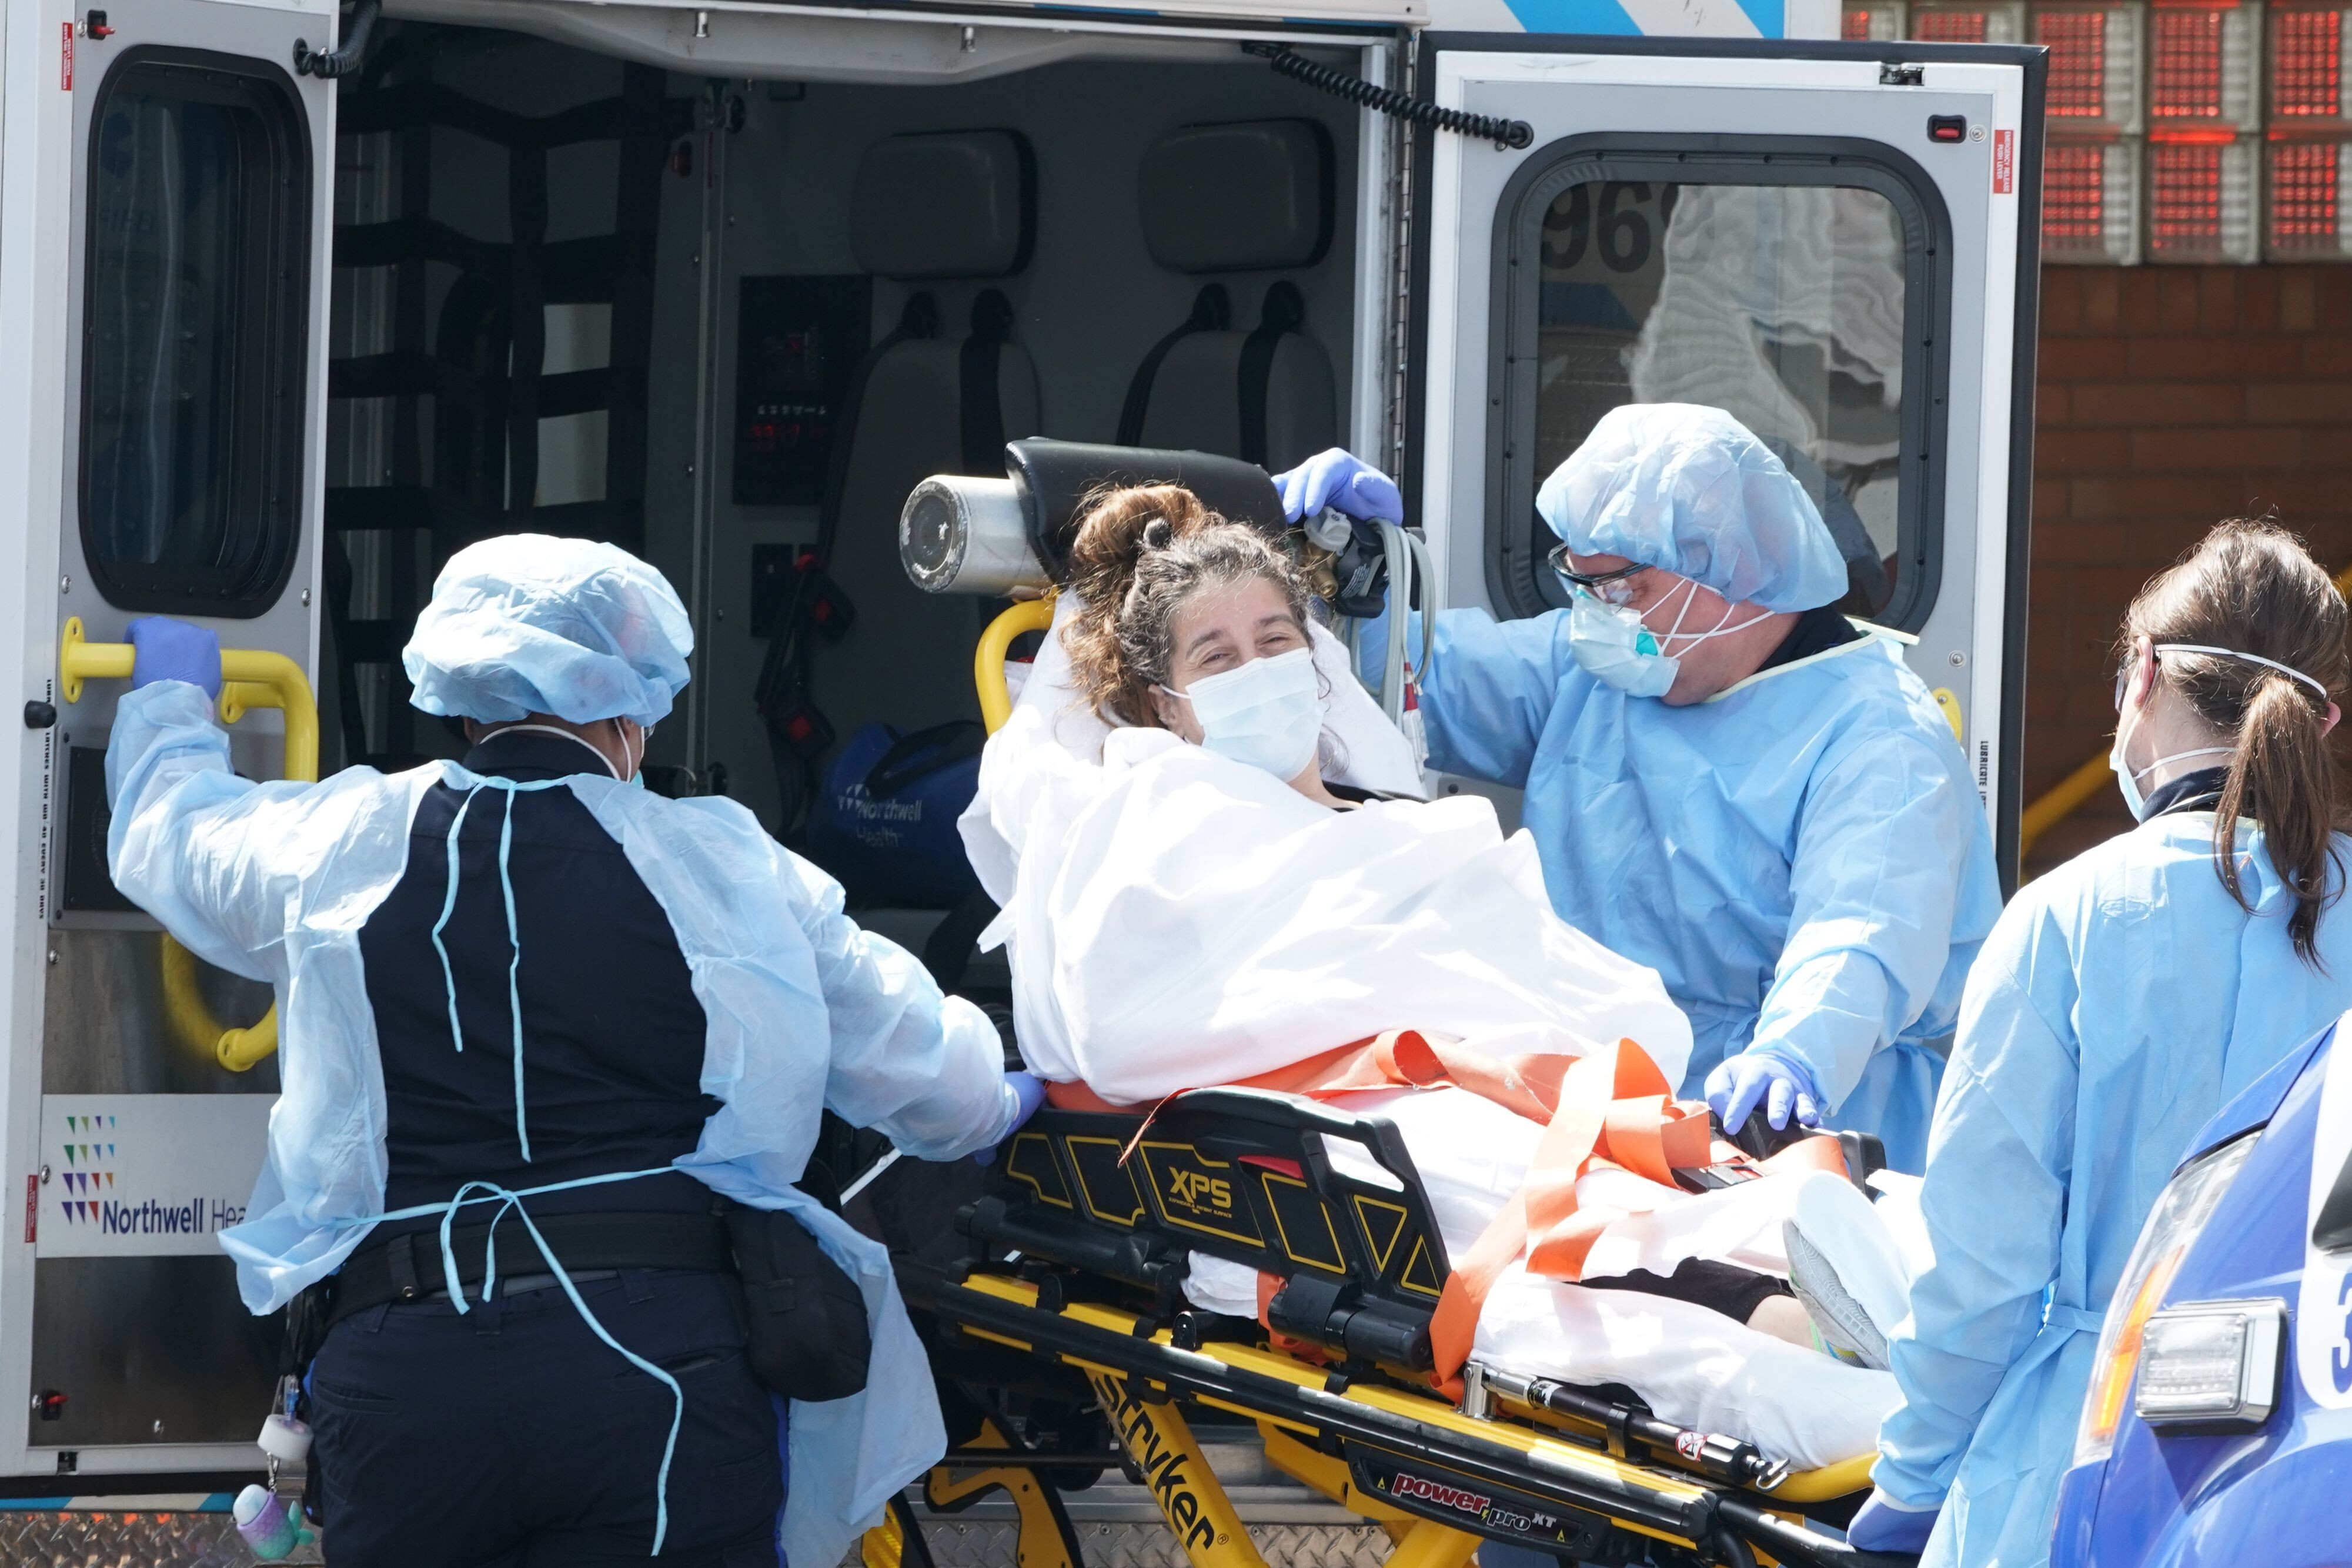 A woman arrives in an ambulance at a hospital in New York on Sunday. Photo: AFP